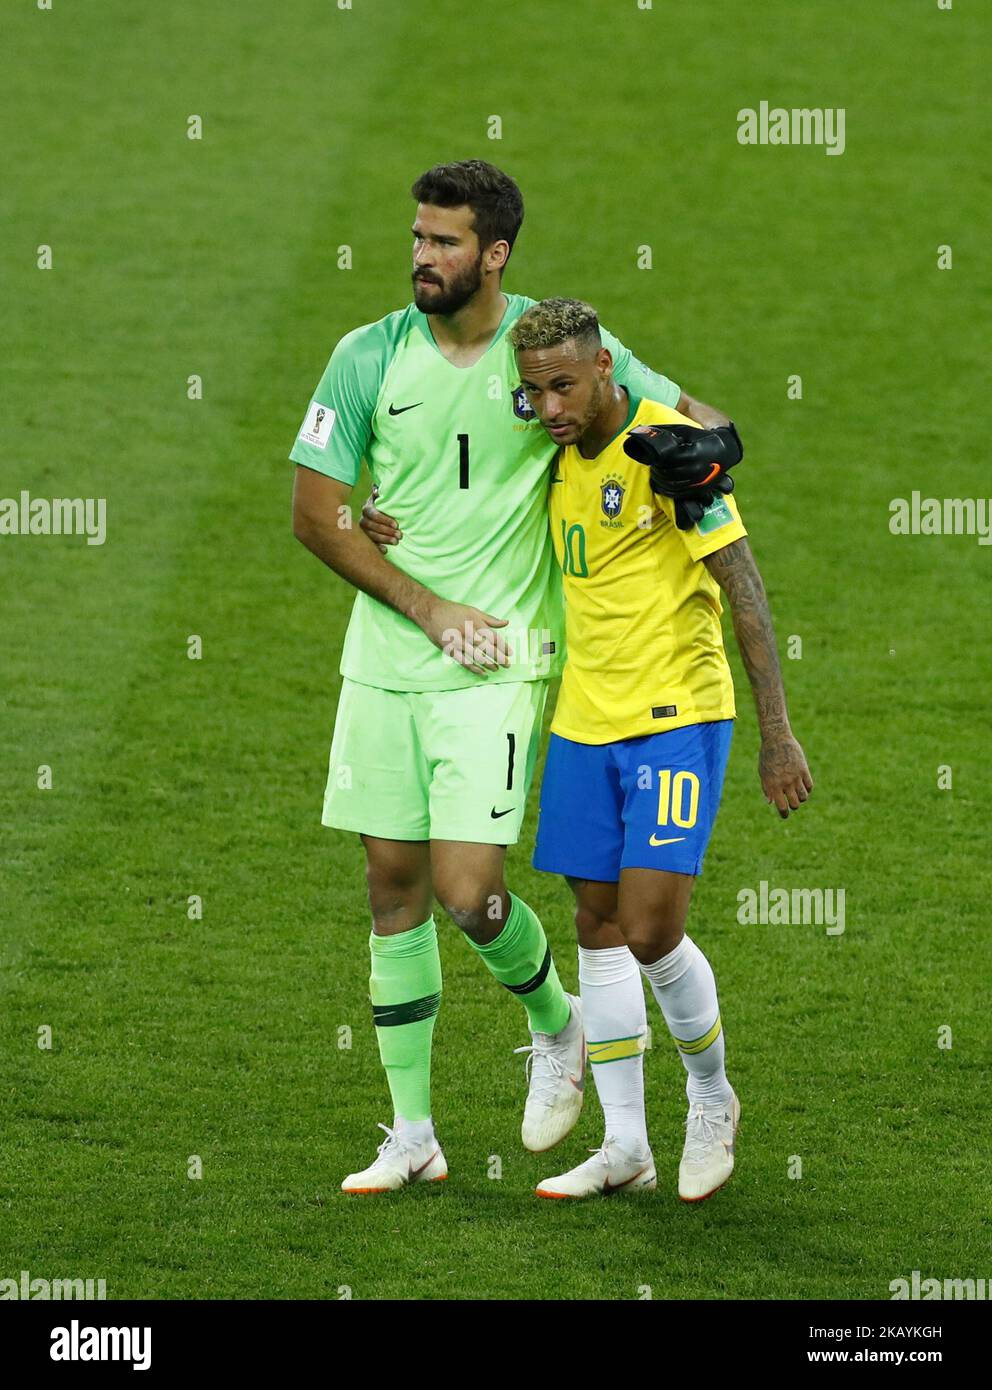 Group E Serbia v Brazil - FIFA World Cup Russia 2018 Becker Alisson (Brazil) and Neymar (Brazil) at Spartak Stadium in Moscow, Russia on June 27, 2018. (Photo by Matteo Ciambelli/NurPhoto)  Stock Photo